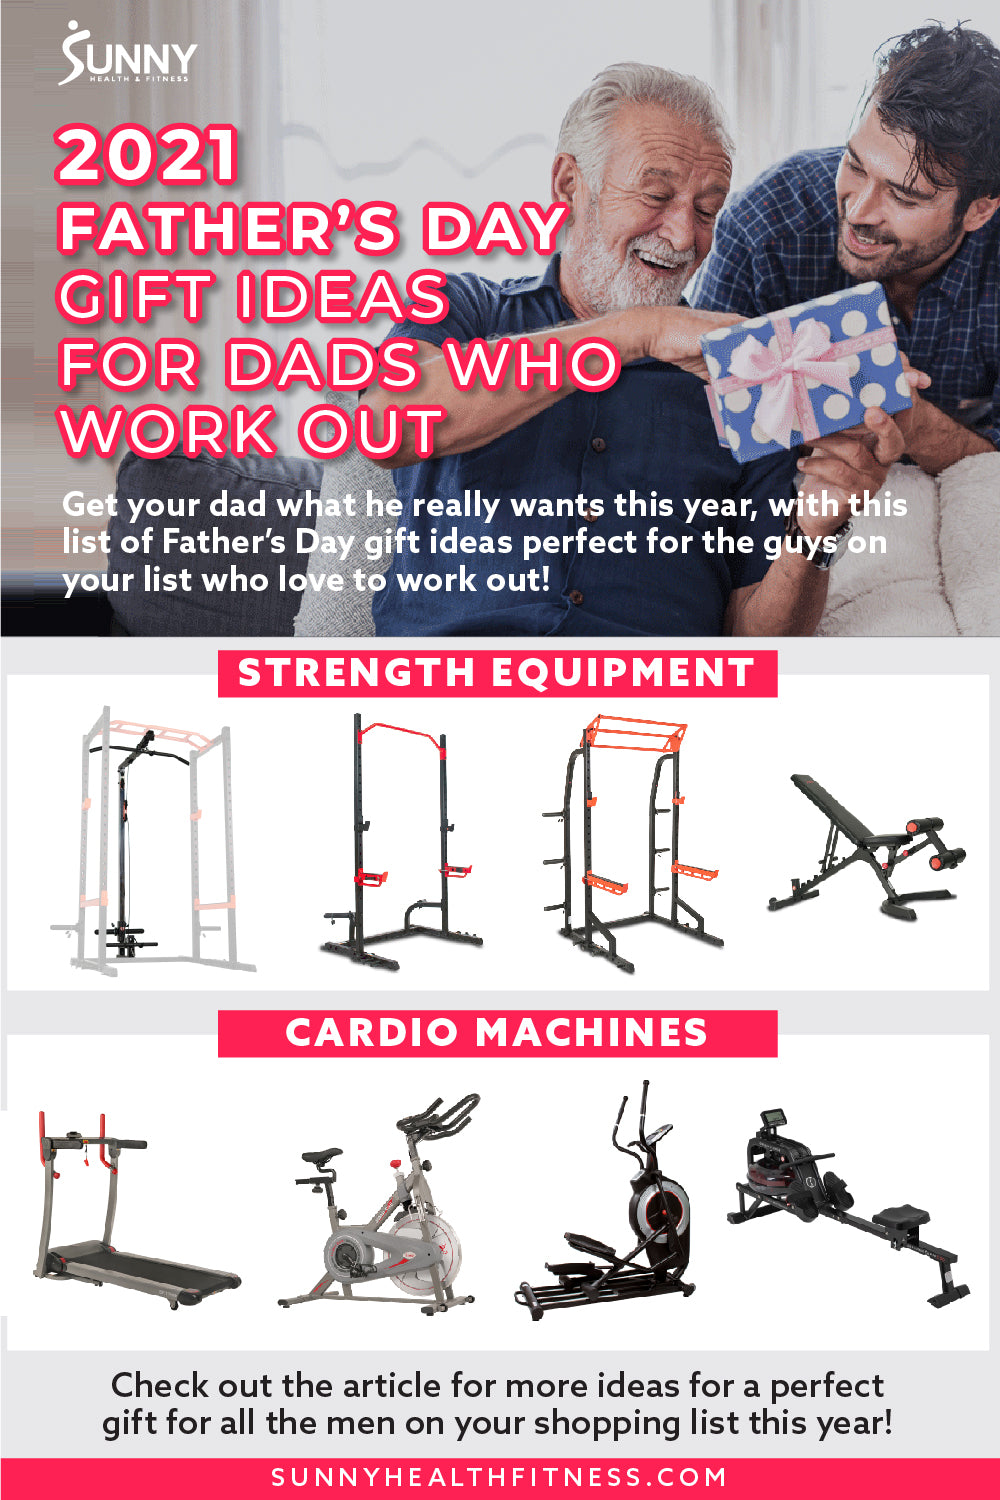 2021 Father's Day Gift Ideas for Dads Who Work Out